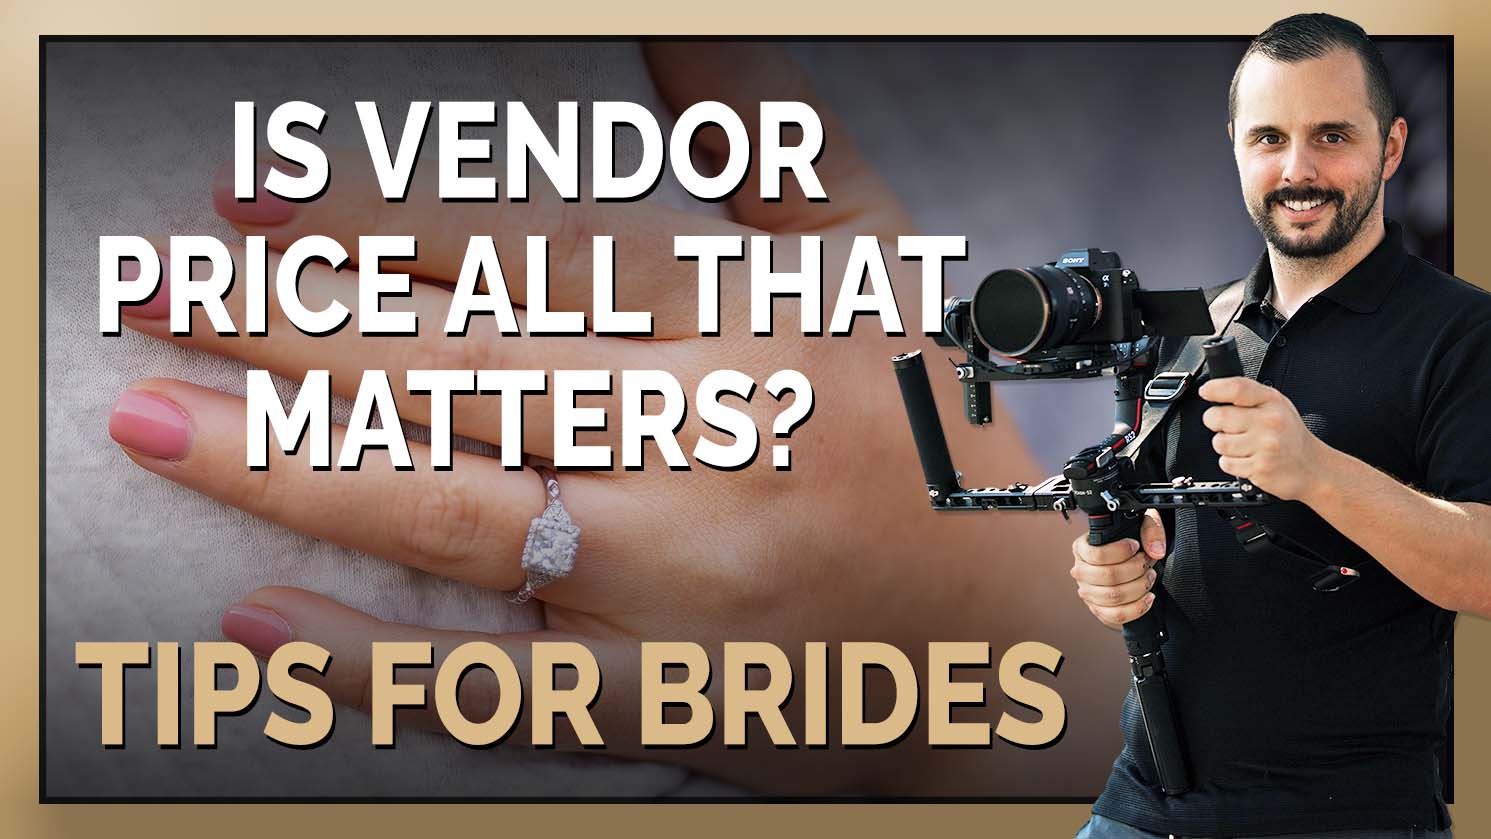 Do Not Shop Only By Price When Hiring The Best Wedding Vendors